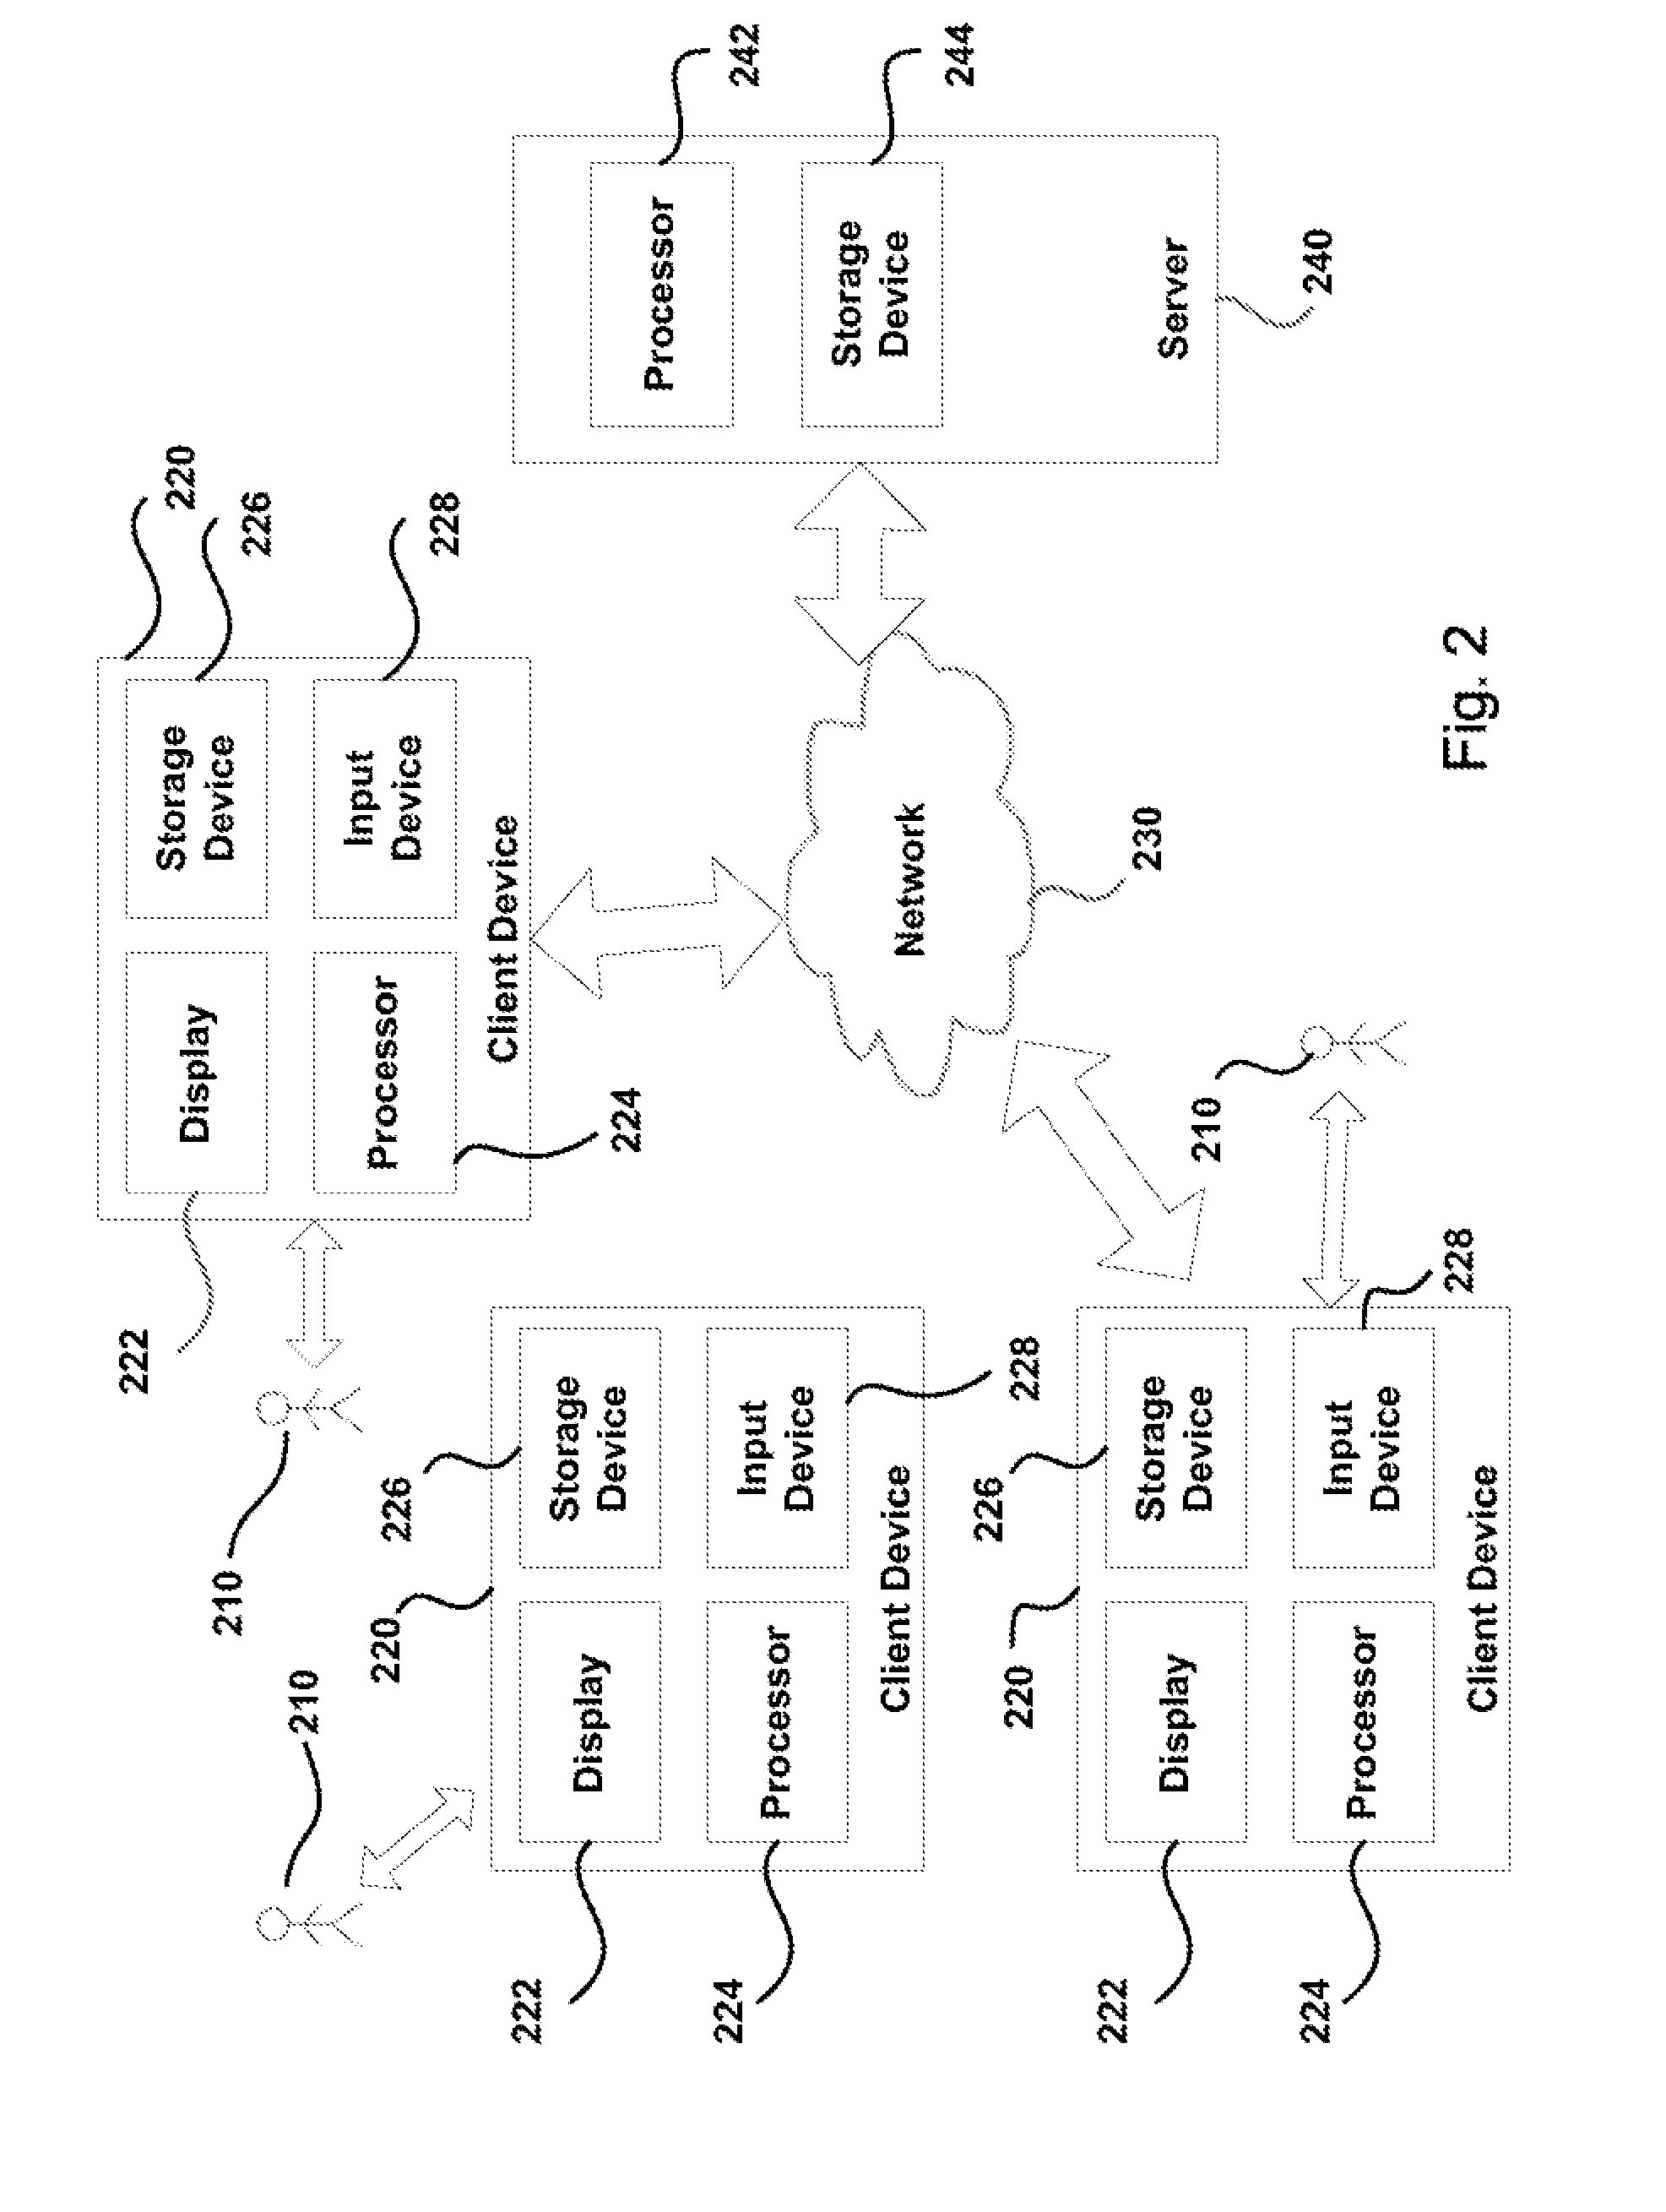 Systems and methods for classifying electronic information using advanced active learning techniques